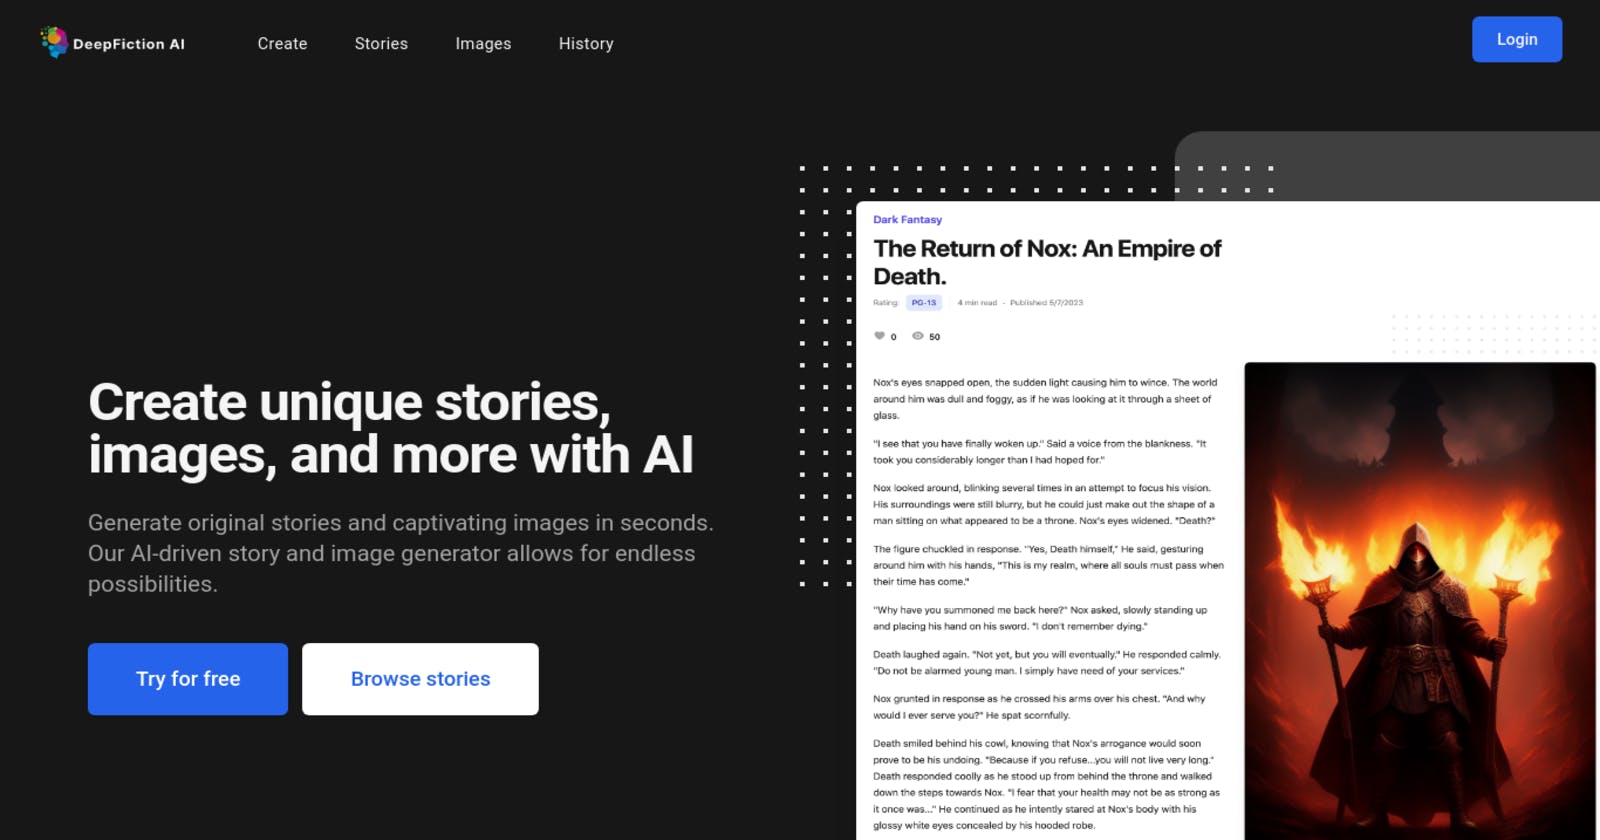 Explore the Power of DeepFiction AI for Creating Unique Stories and Images